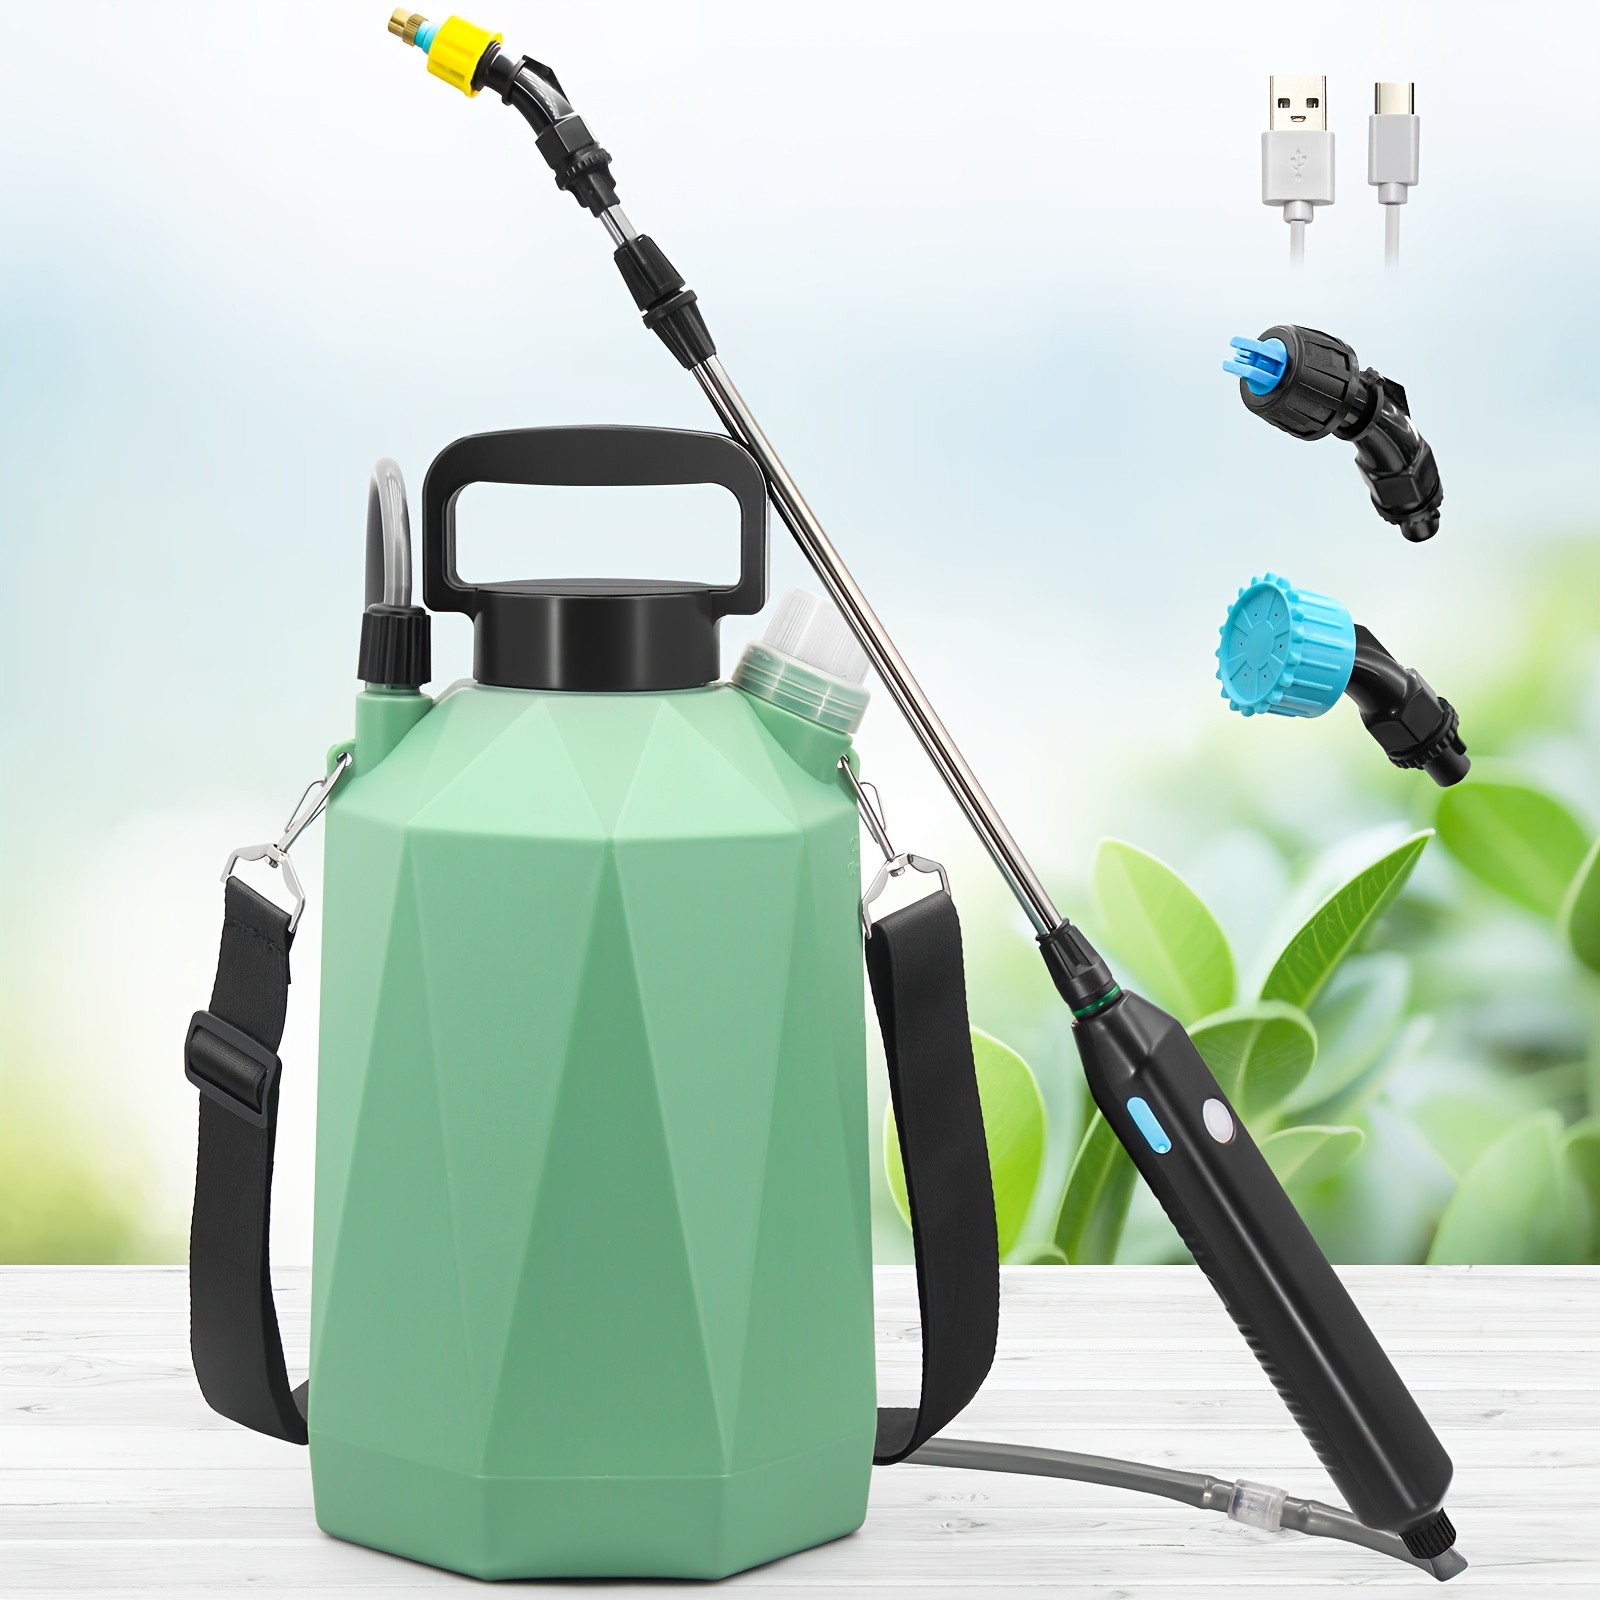 

Battery Powered Sprayer 1.35gallon/5l, Electric Garden Sprayer With Usb Rechargeable Handle, Sprayer With 3 Mist Nozzles, Telescopic Wand, And Shoulder Strap For Lawn And Garden